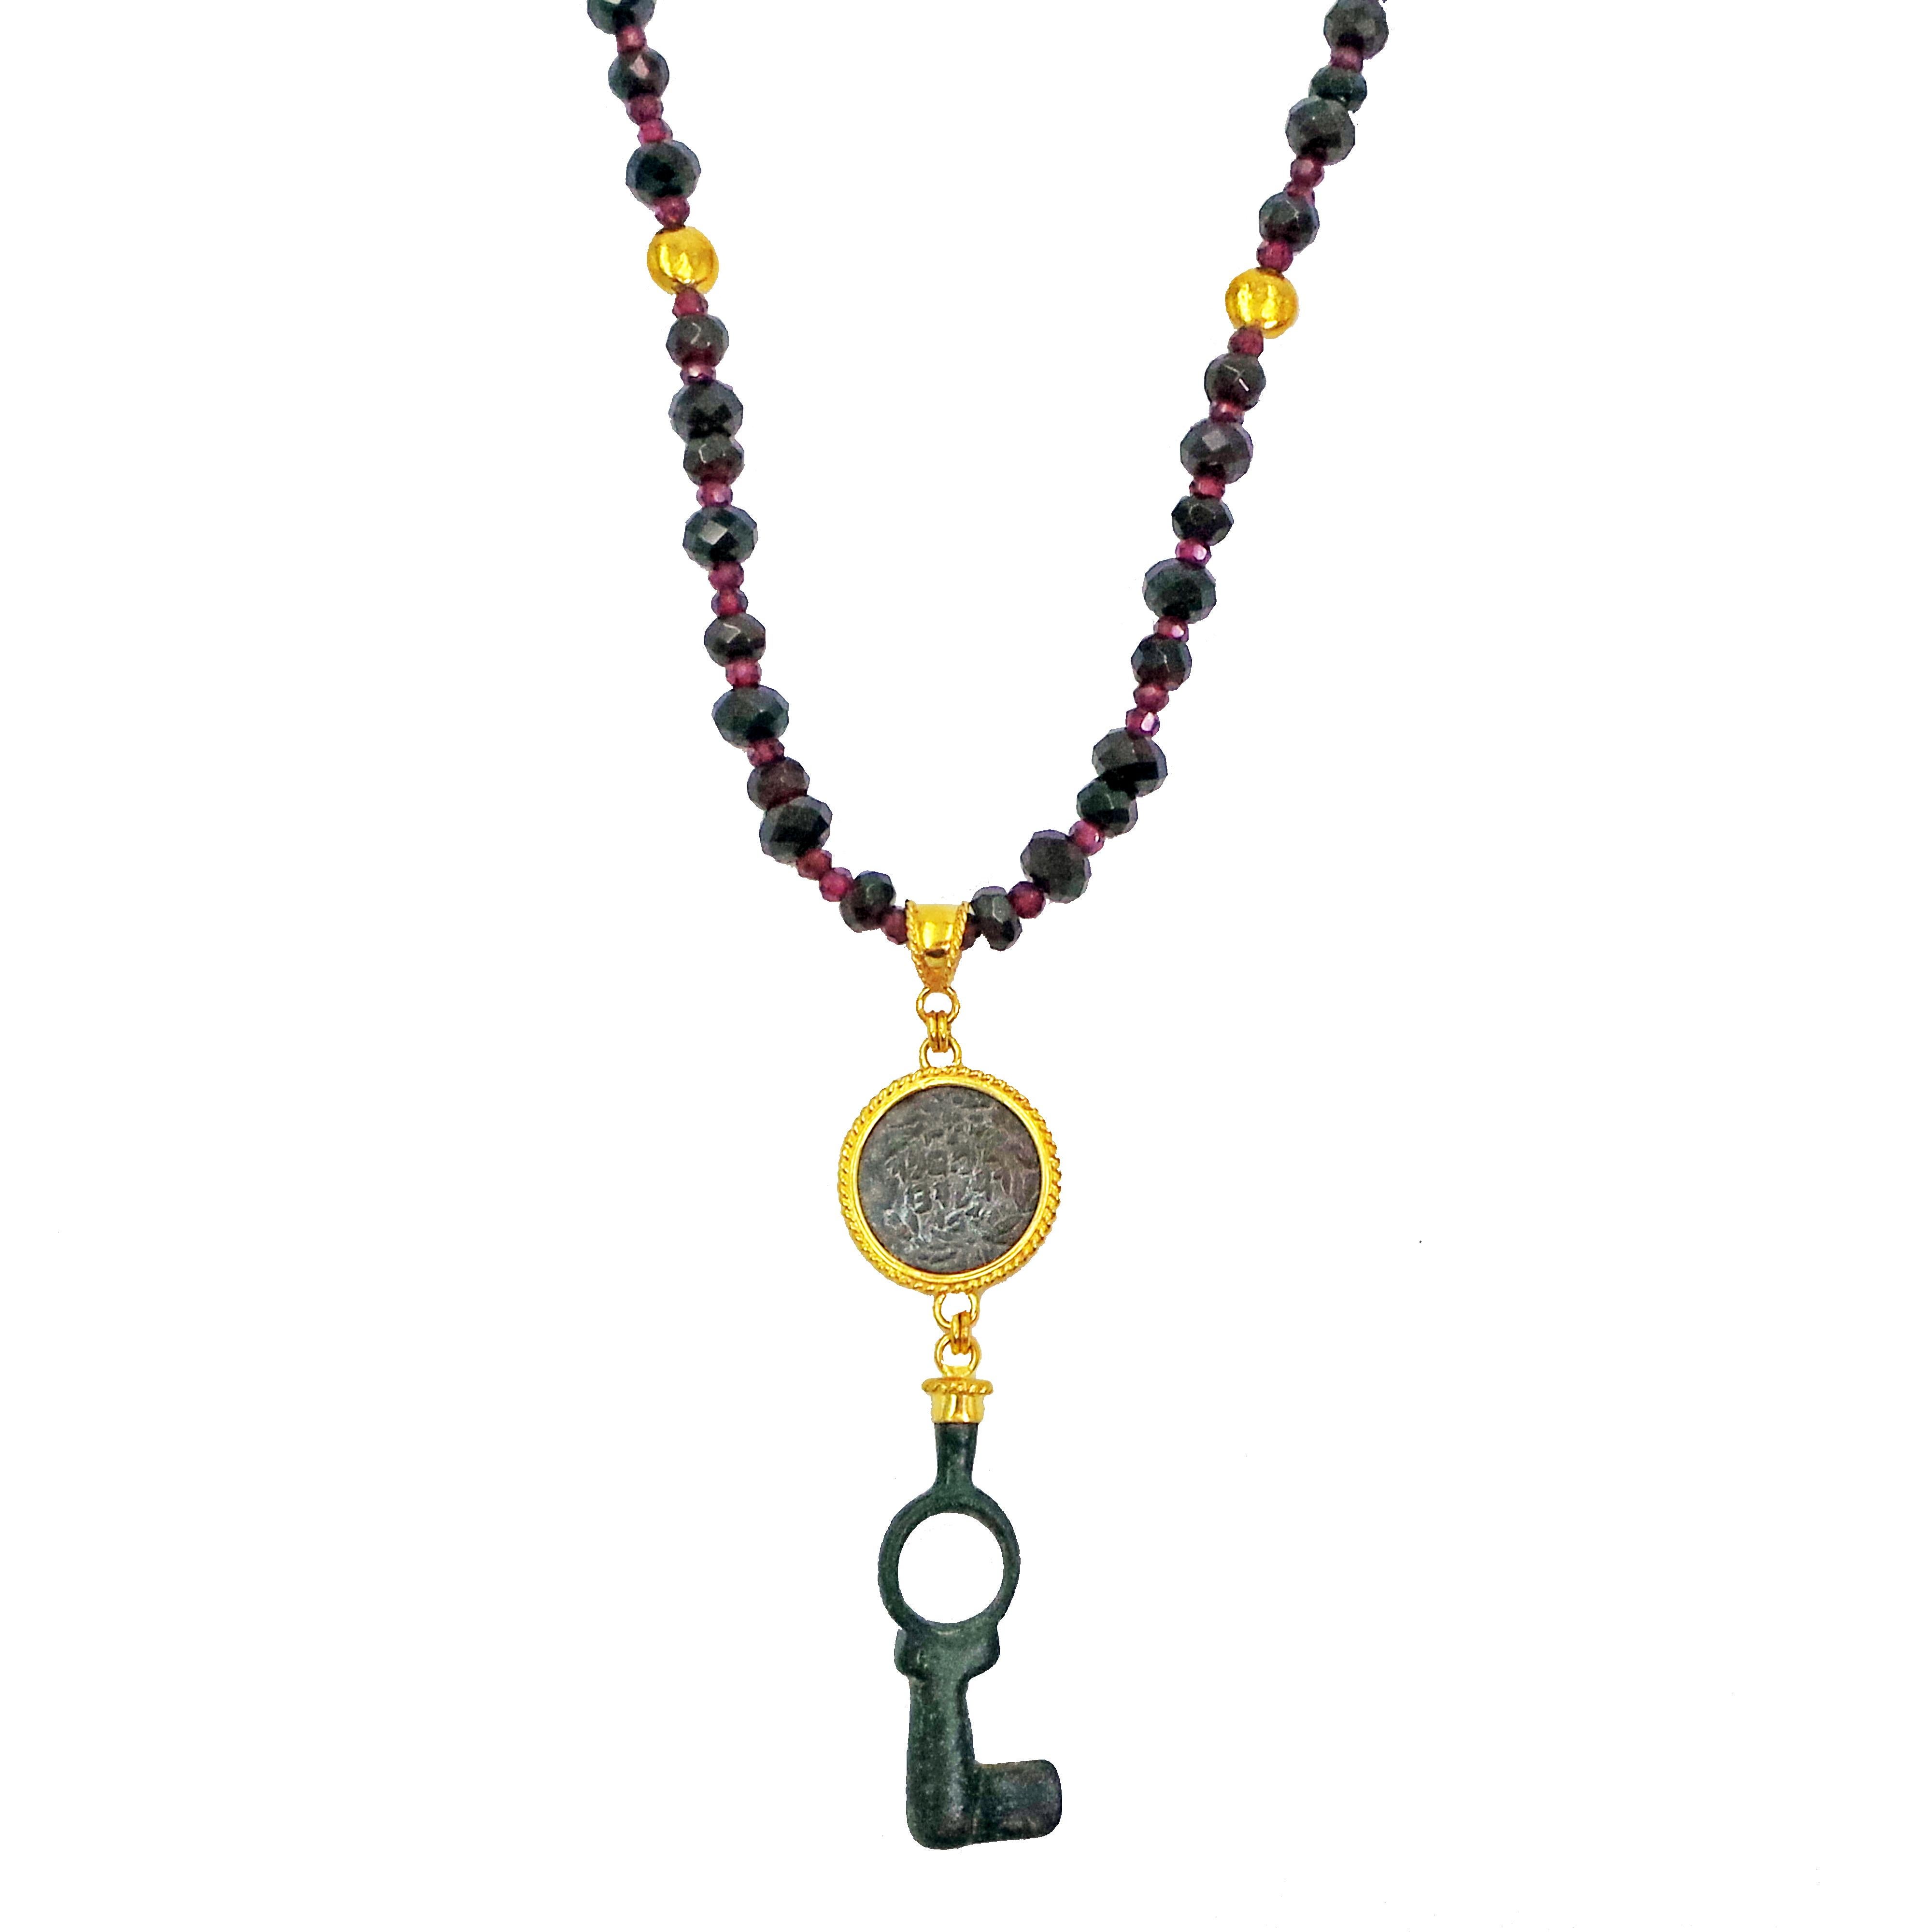 Authentic ancient stamped Roman glass and authentic ancient Roman bronze key 22k yellow gold dangle pendant on a faceted Garnet beaded necklace with two accent, hammered 22k gold beads. Necklace is 24 inches in length, and finished with a 22k gold